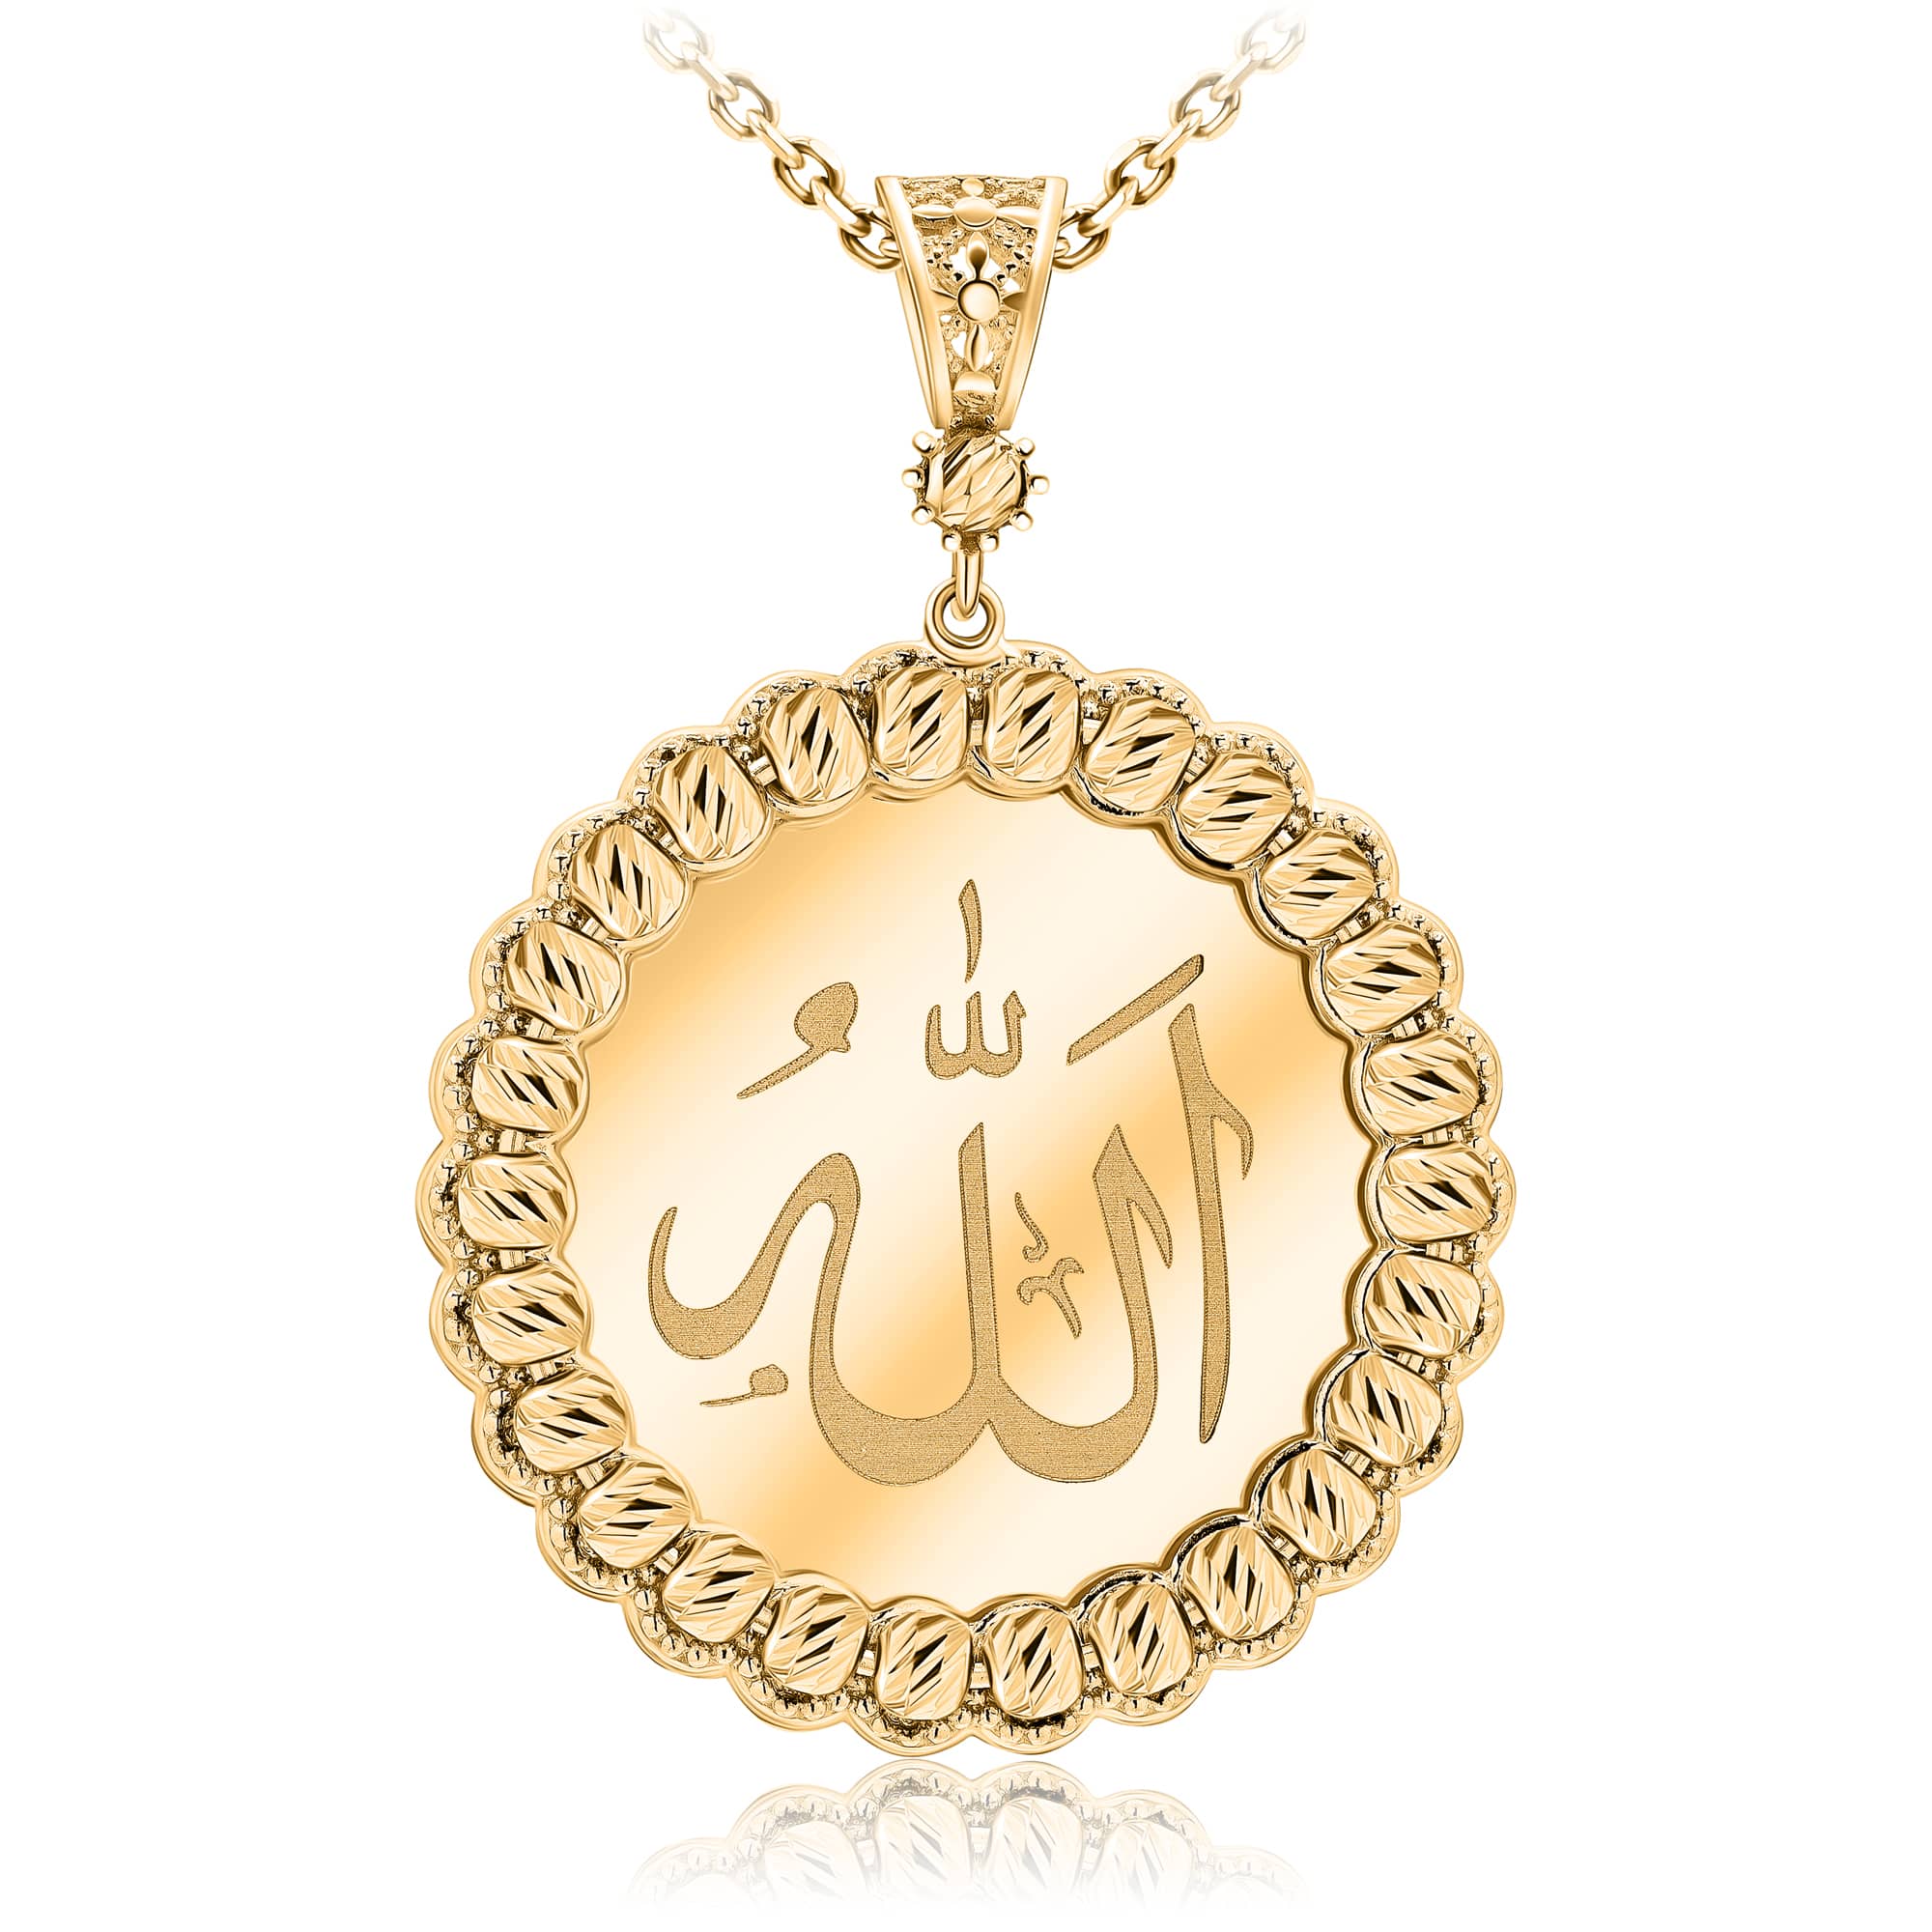 Memoir Gold plated CZ studded, Allah word, pentagon shape muslim jewellery chain  pendant necklace for Men and Women : Saloni Xaviers: Amazon.in: Fashion